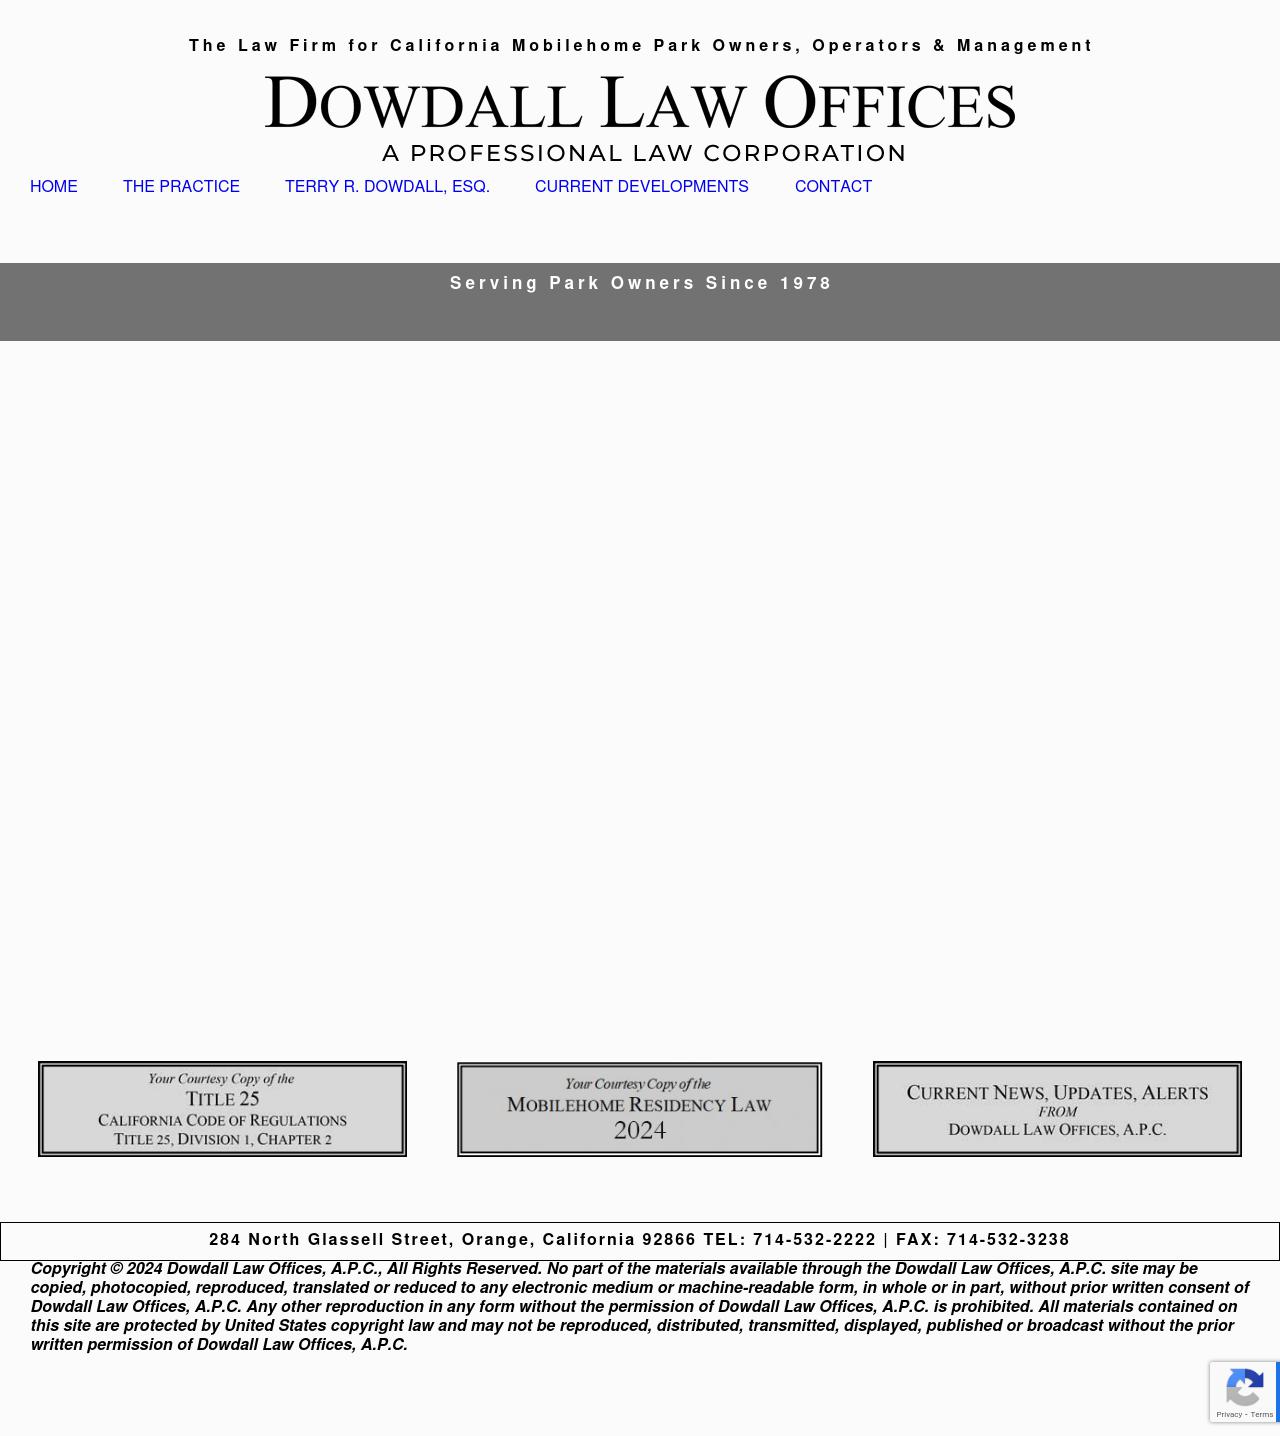 Dowdall Law Offices, A.P.C. - Orange CA Lawyers